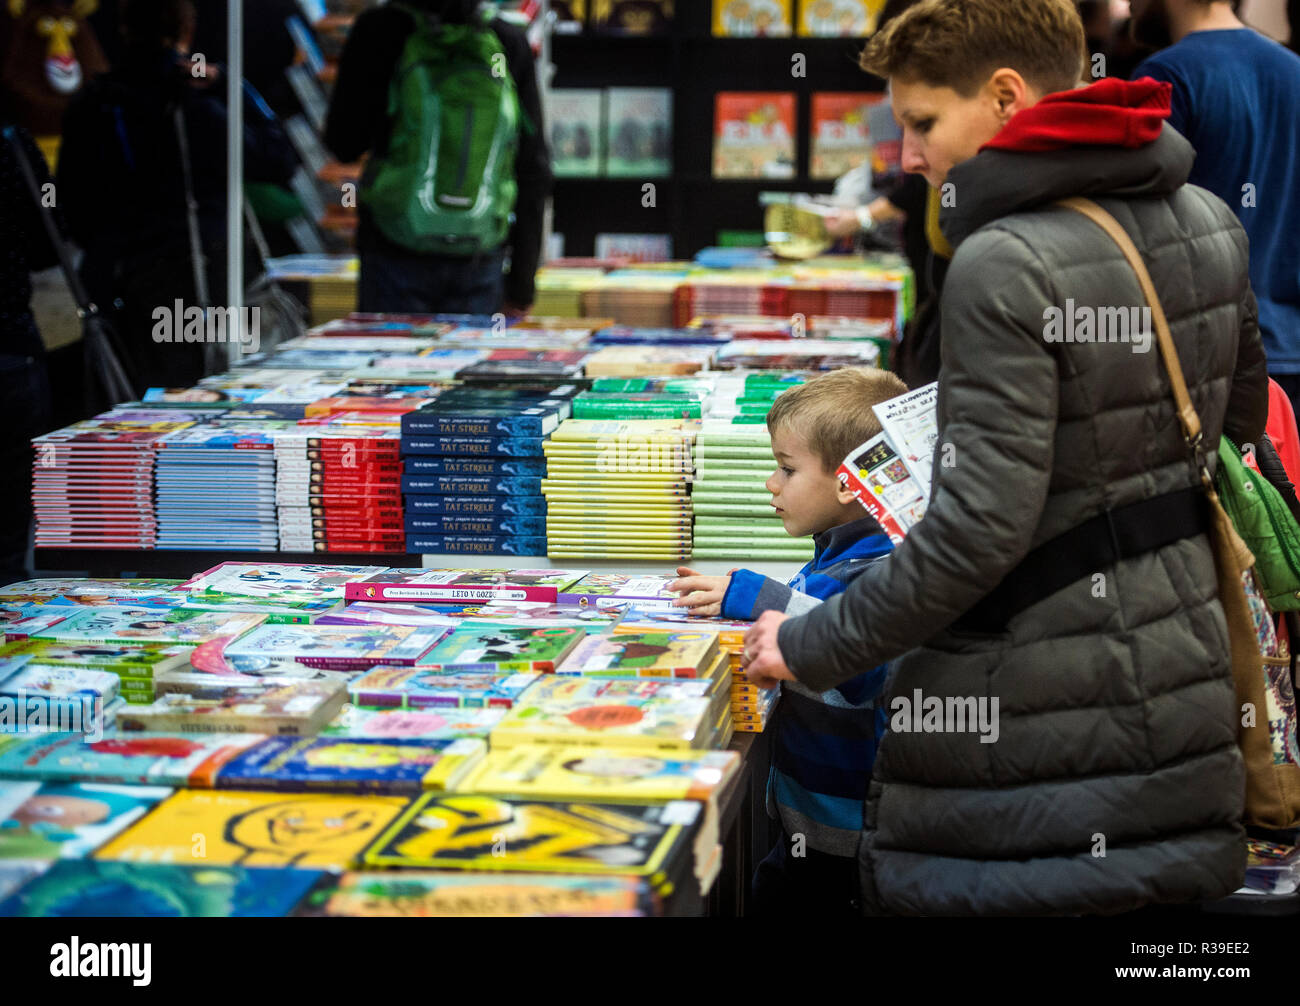 Ljubljana, Slovenia. 21th November 2018. Visitors looking and reading books at 34th Slovenian book fair which brings more than 300 events, featuring more than a hundred publishers and 25,000 books, including 3,000 new titles. The fair is annually visited by around 35,000 book lovers. Credit: Matic Štojs Lomovšek/Alamy Live News Stock Photo